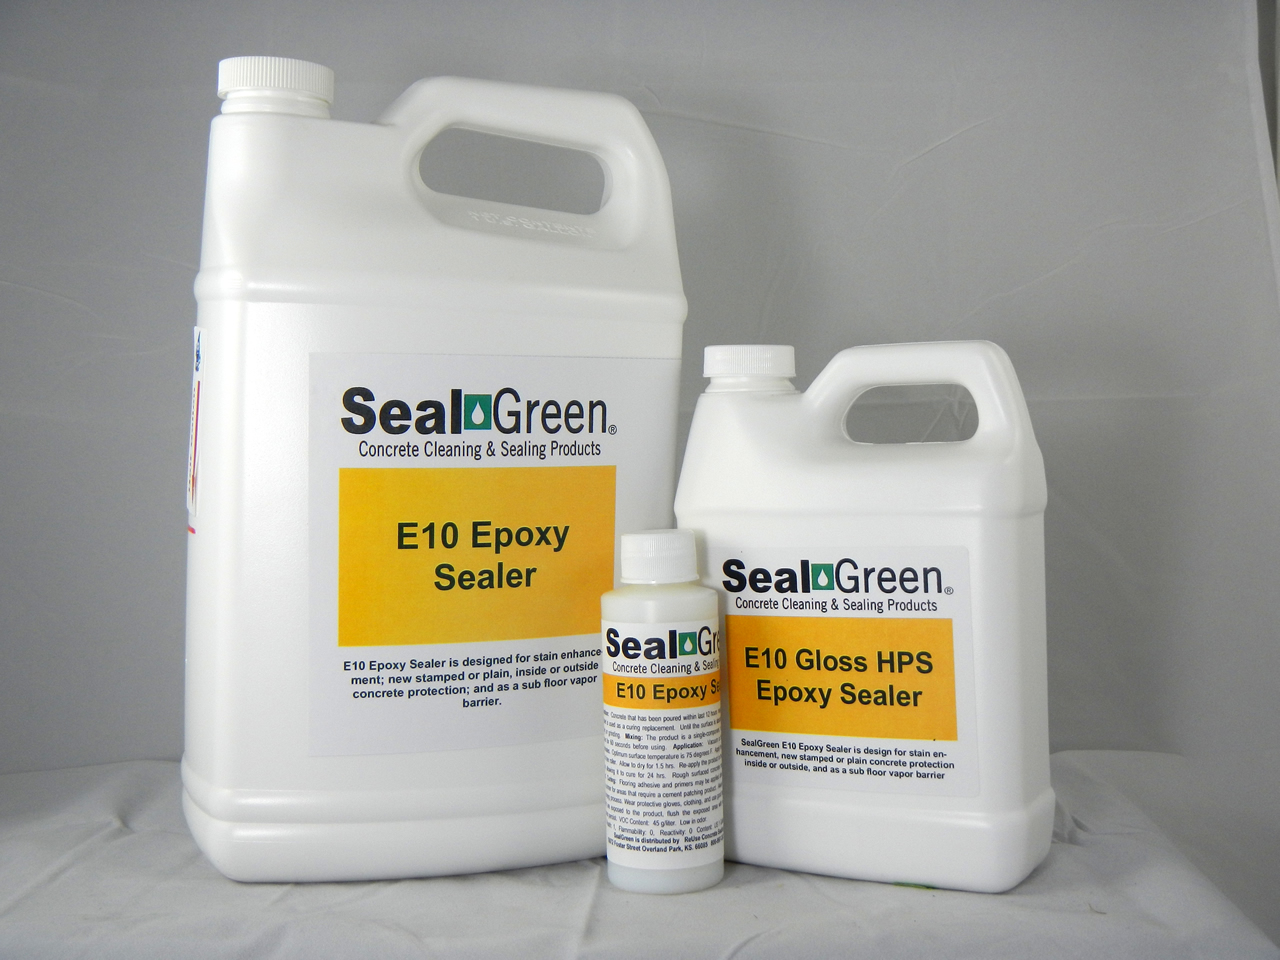 How effective is the E10 sealant for radon mitigation?